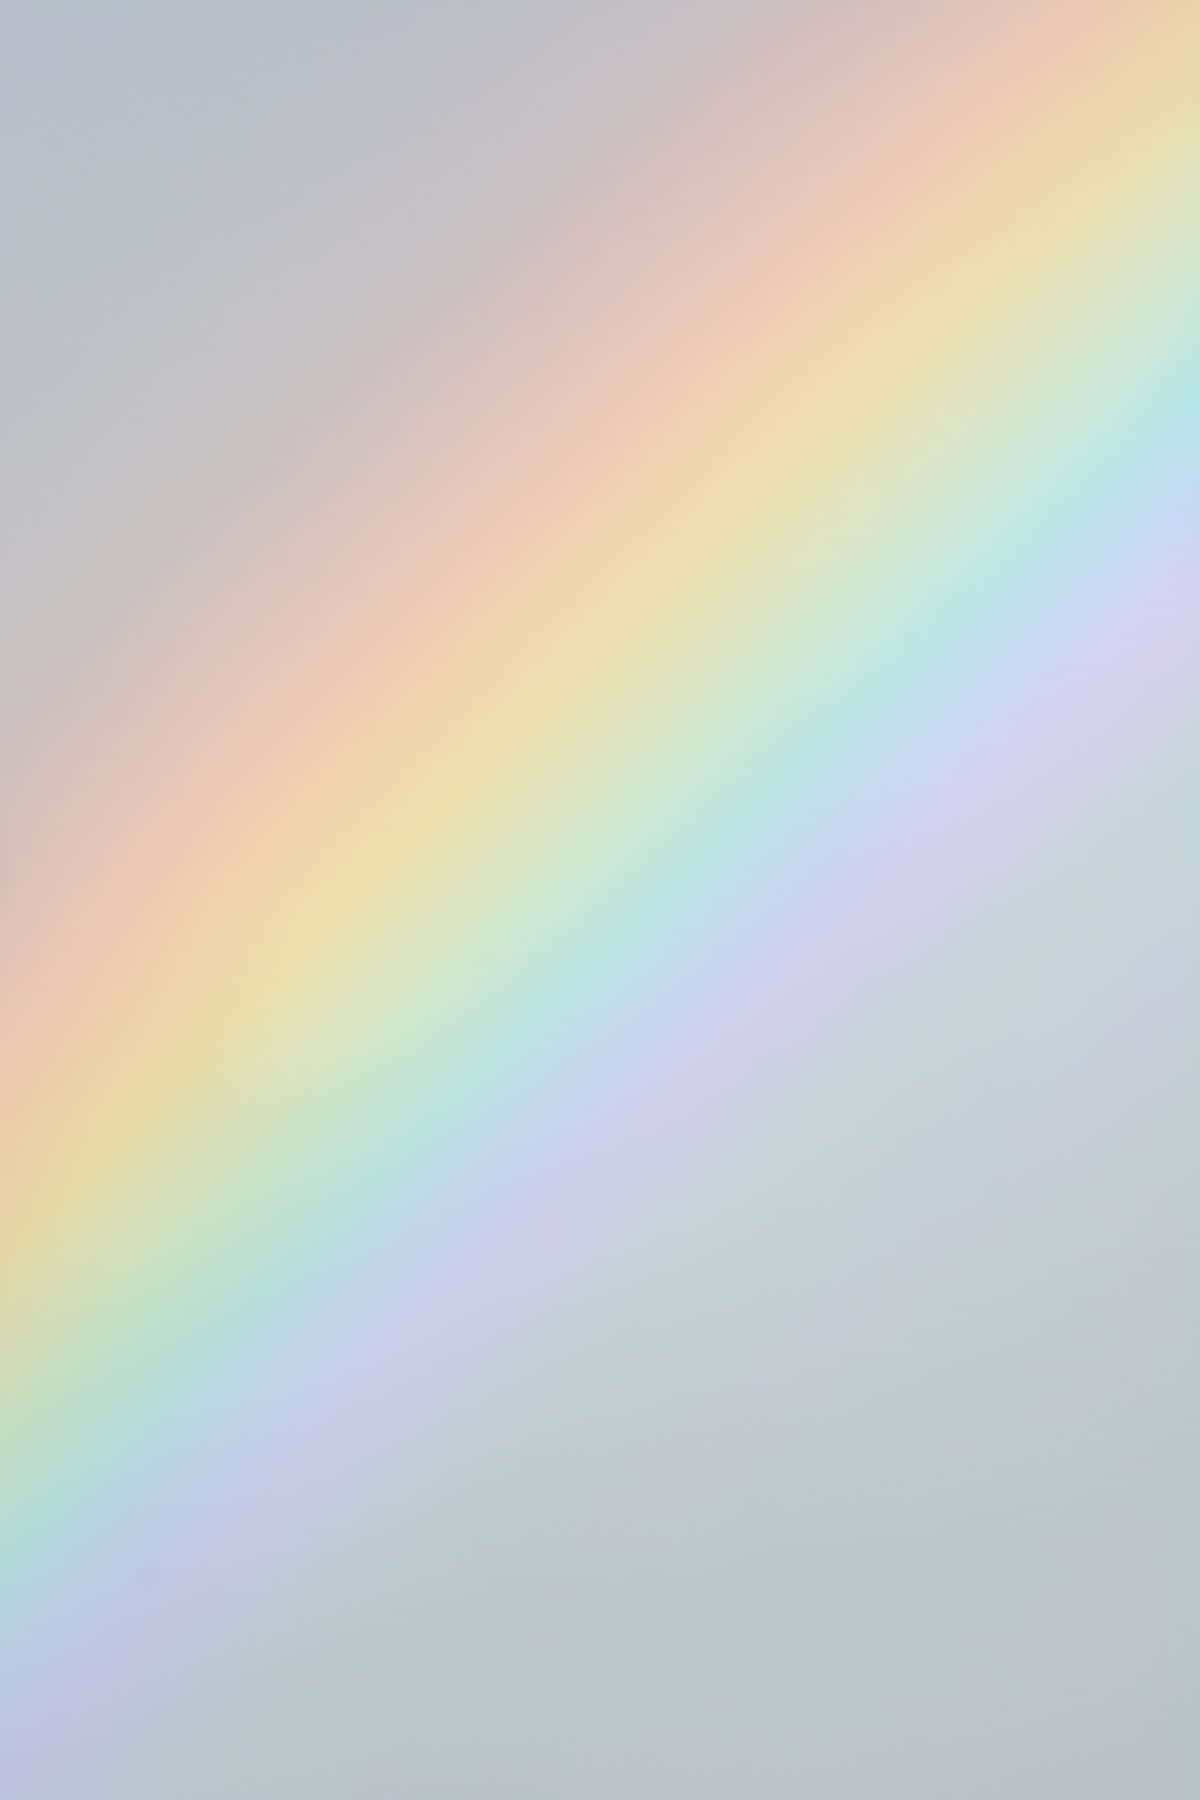 A Rainbow Is Shown On A Gray Background Wallpaper